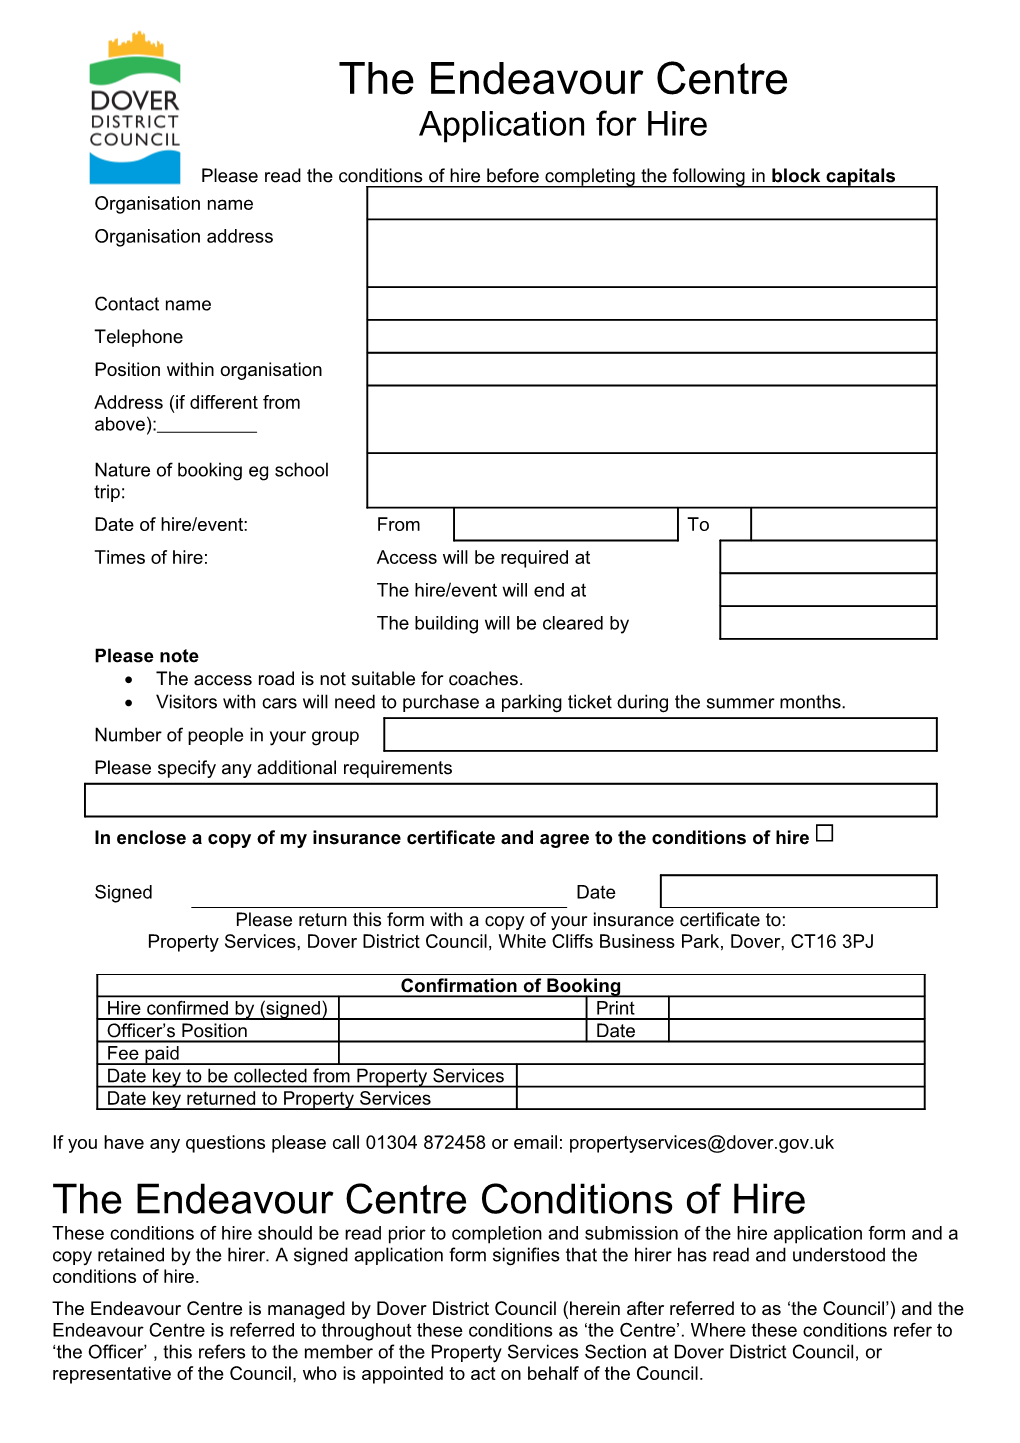 Application Form to Book the Endeavour Centre